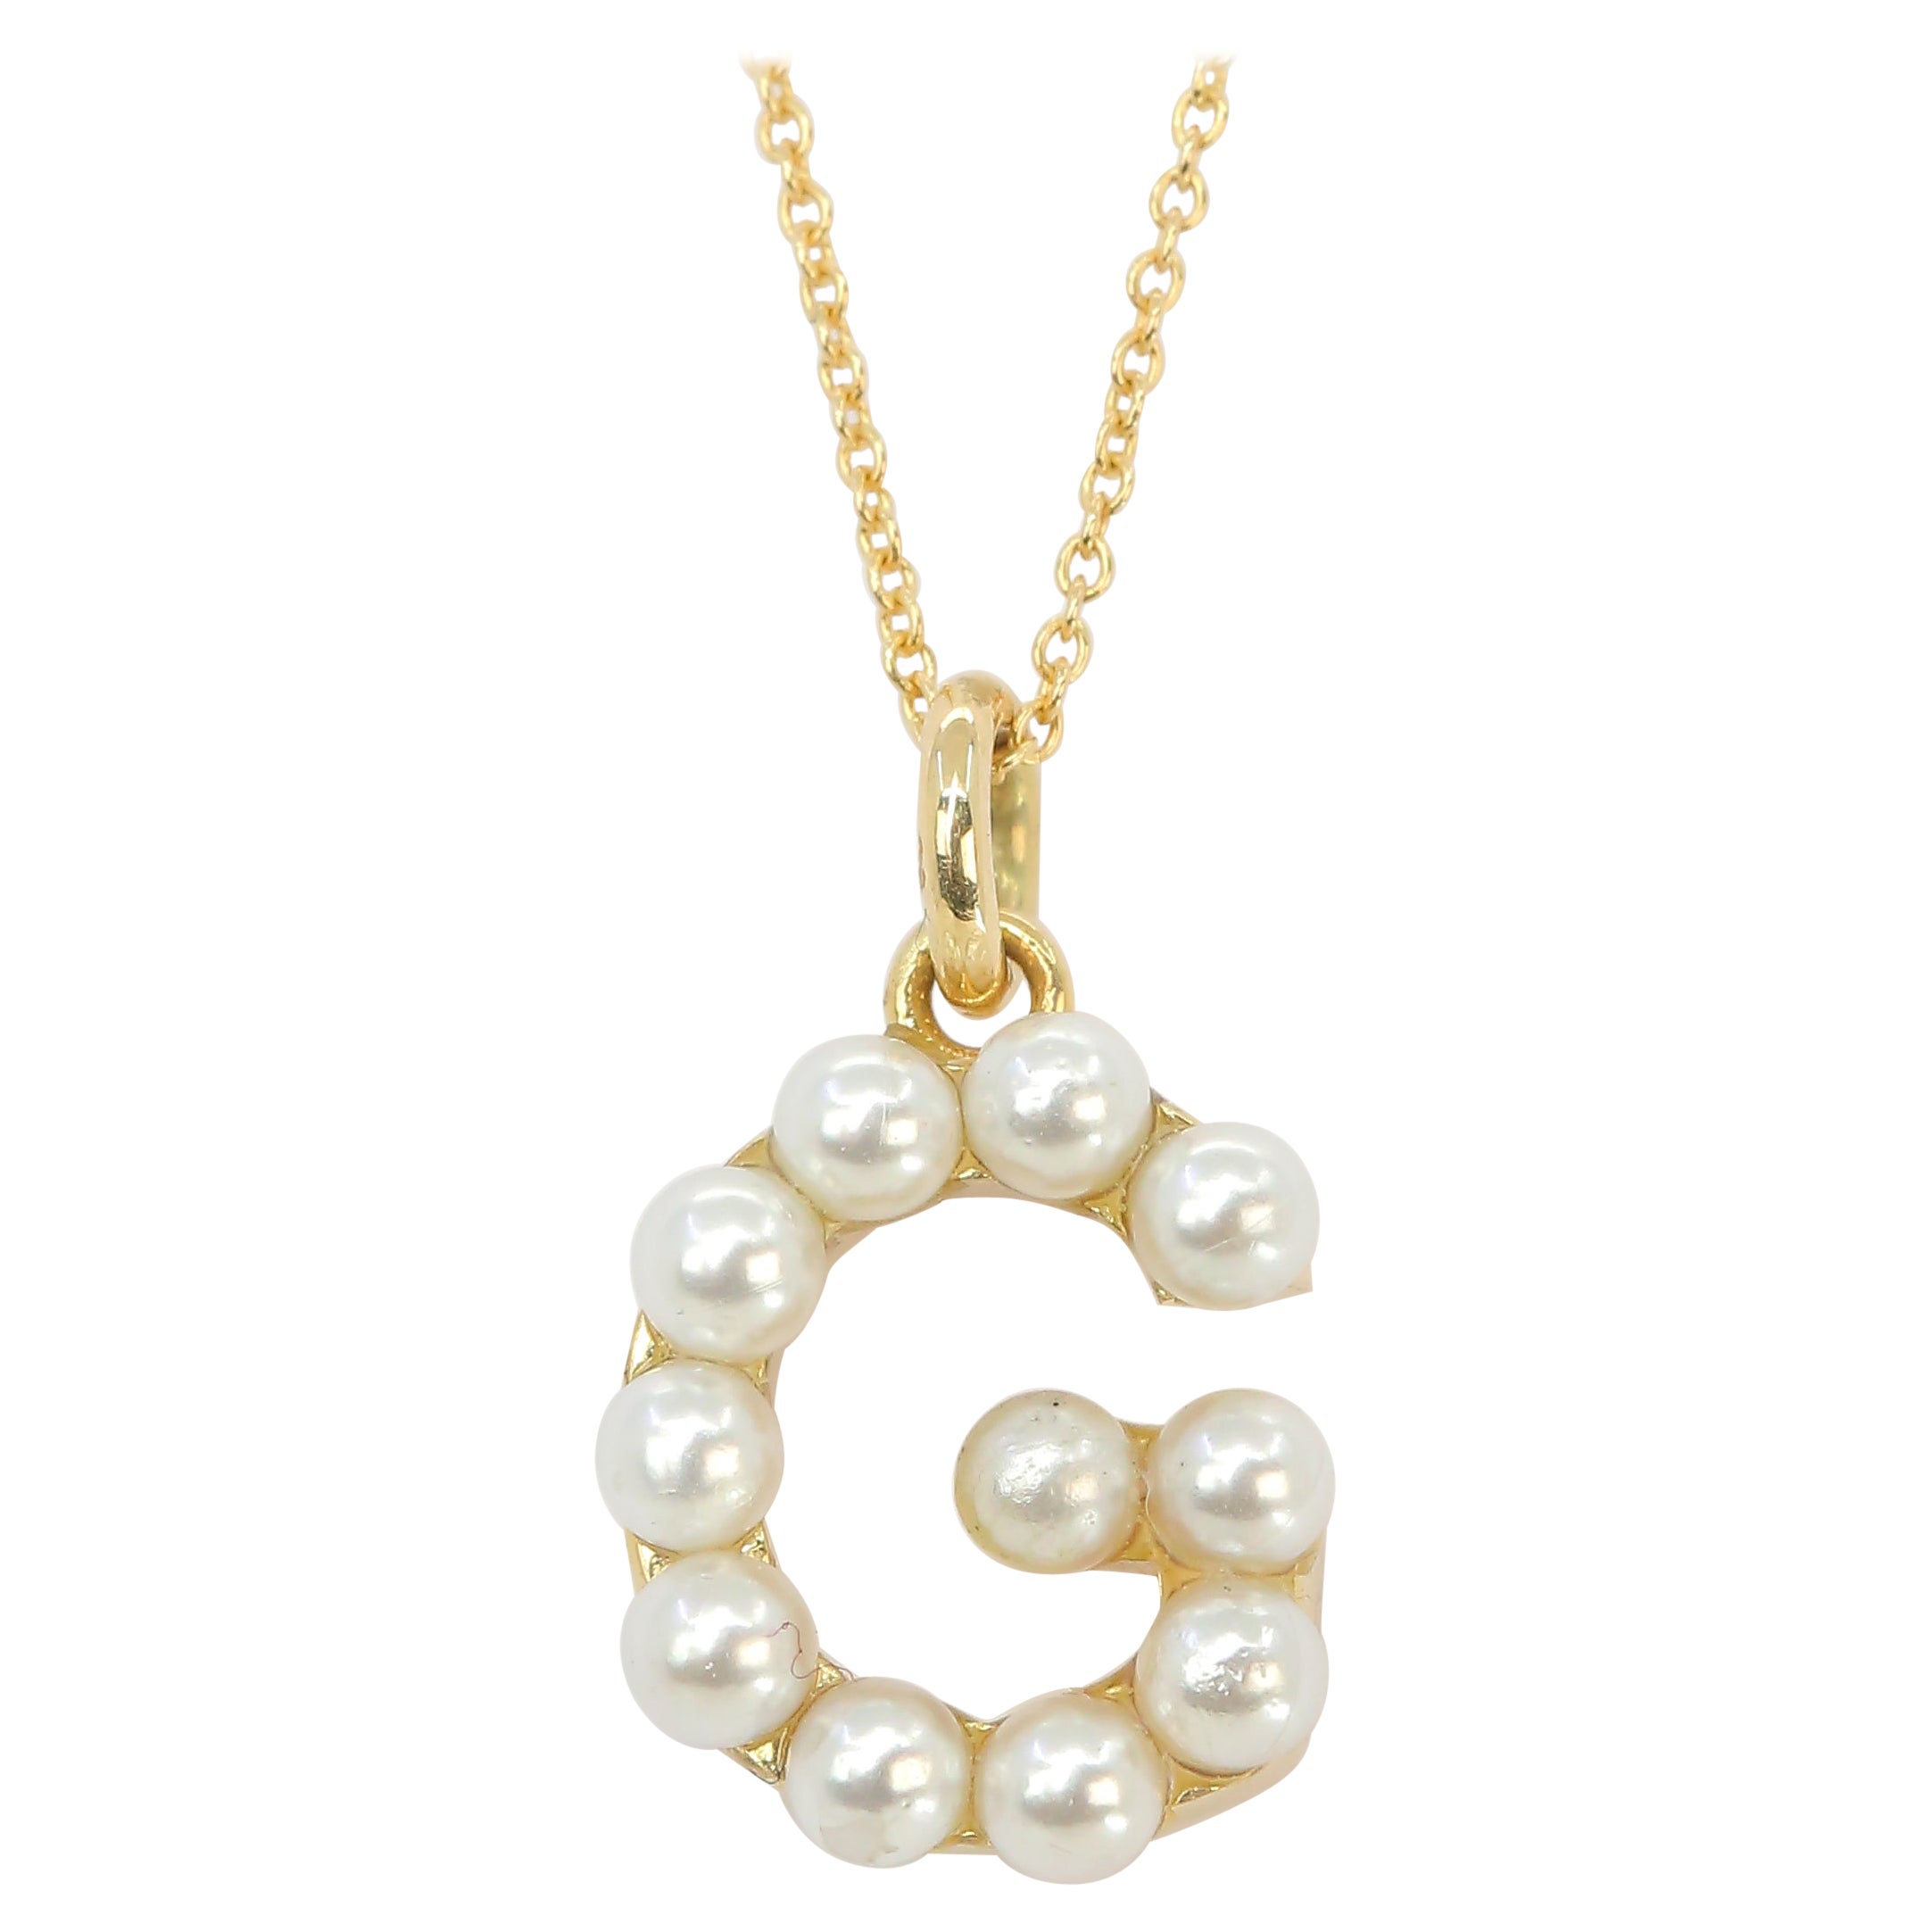 Share more than 153 pearl necklace with gold initial - songngunhatanh ...